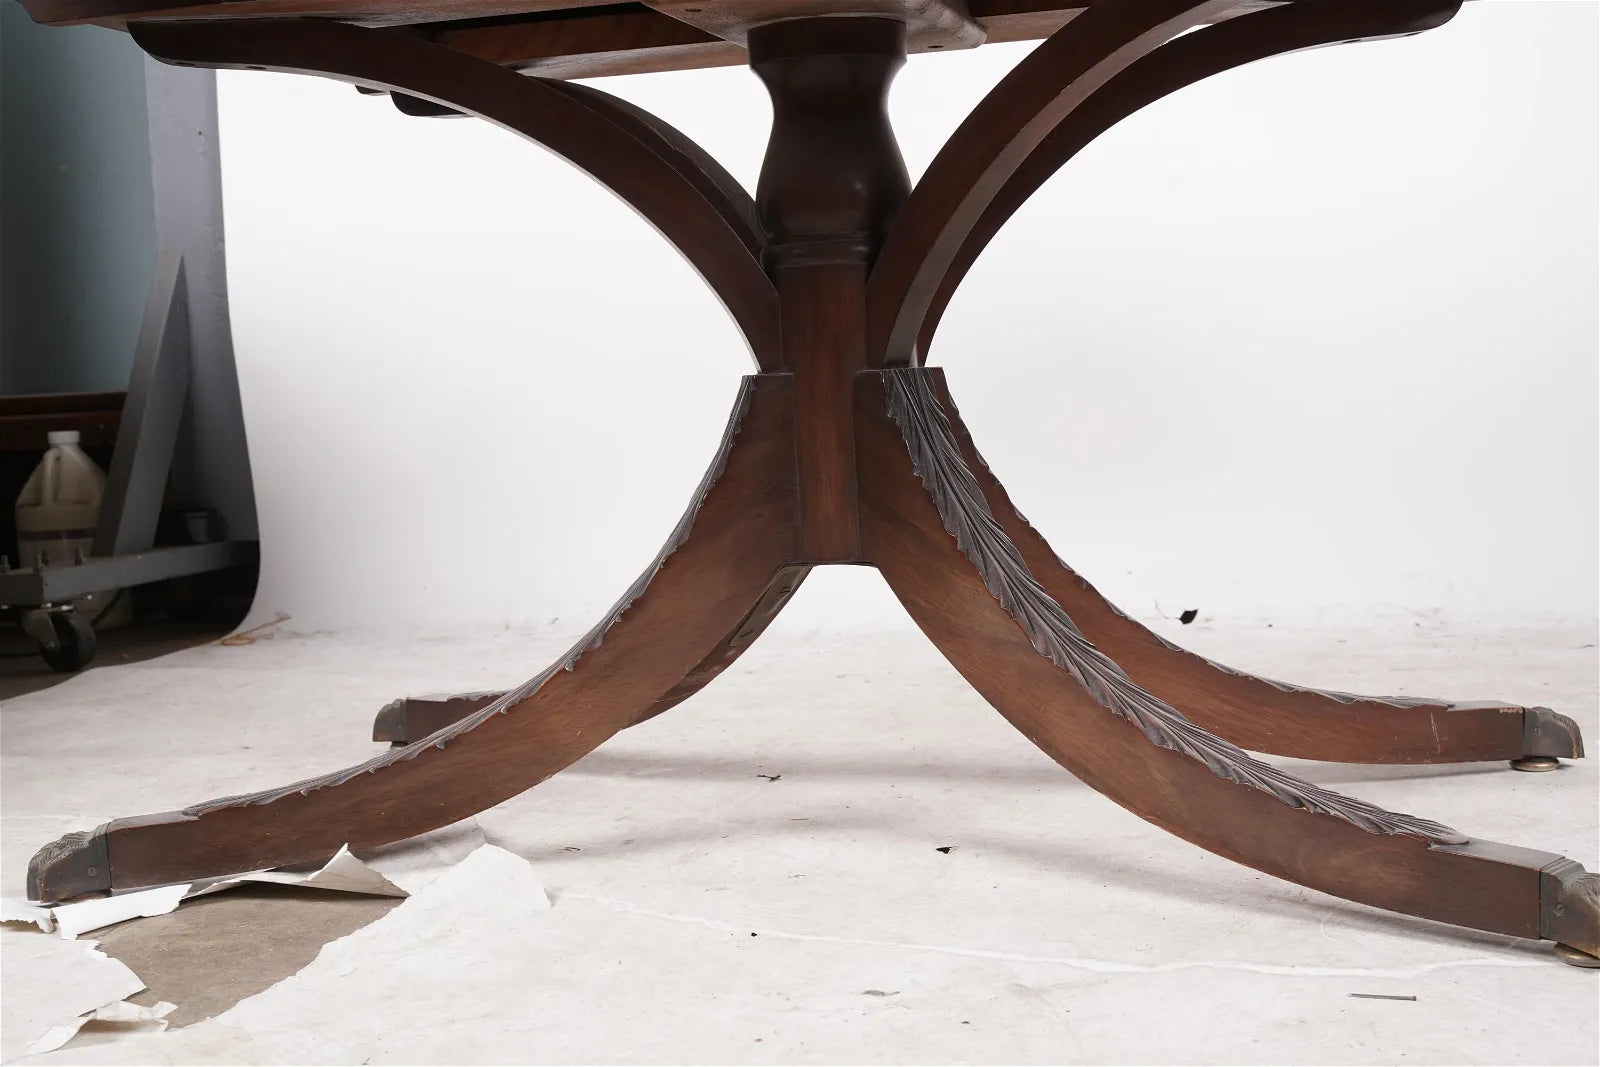 AF1-155: Antique Early 20th C English Regency Style Mahogany Drop Leaf Dining Table w/ Leaves